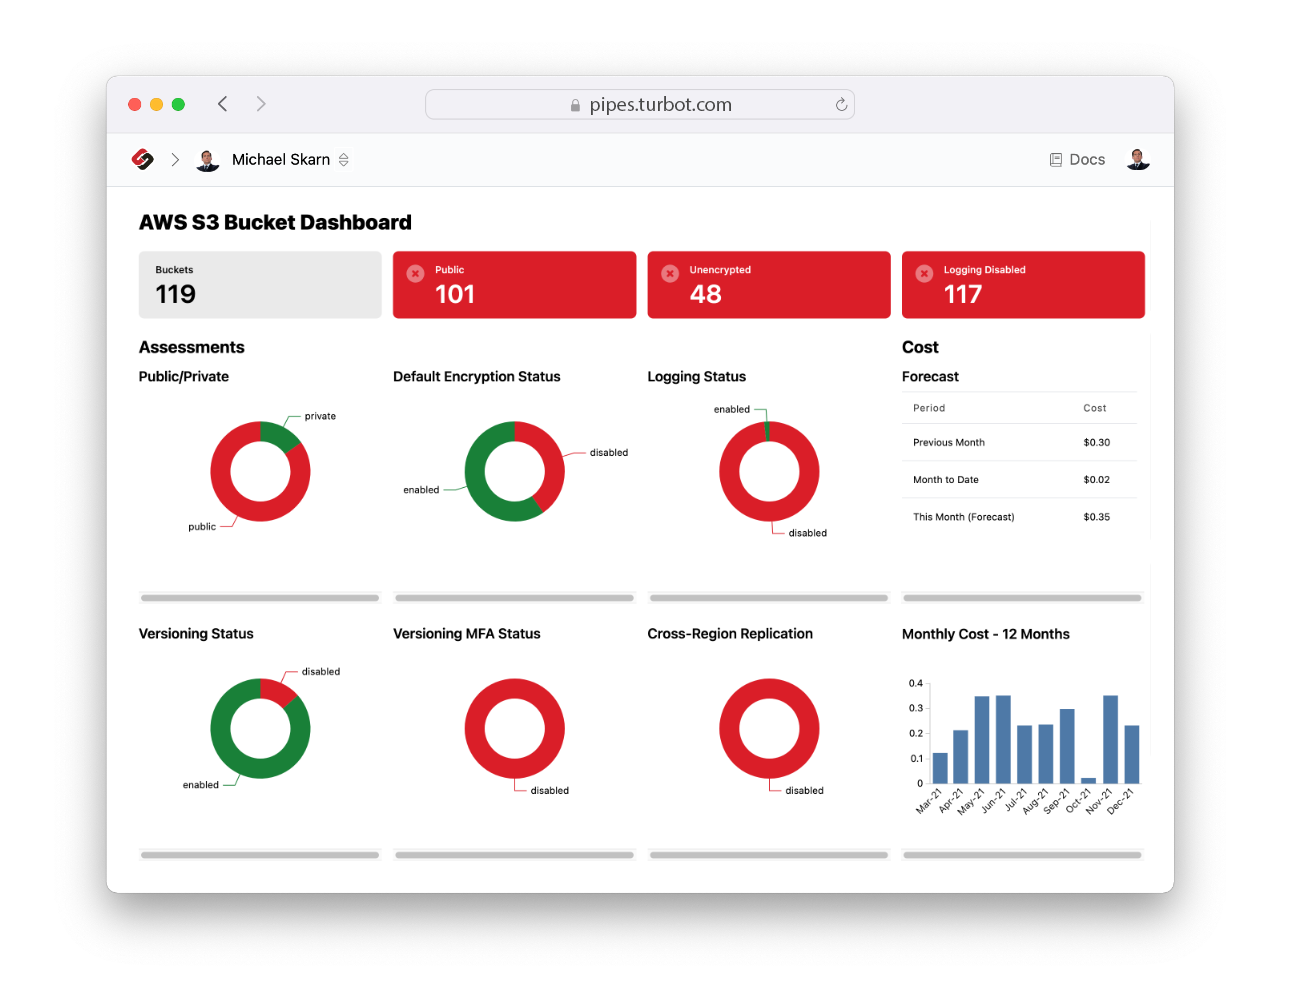 Screenshot of 'AWS S3 Bucket Dashboard' on 'pipes.turbot.com' with metrics on bucket privacy, encryption, logging, and costs.